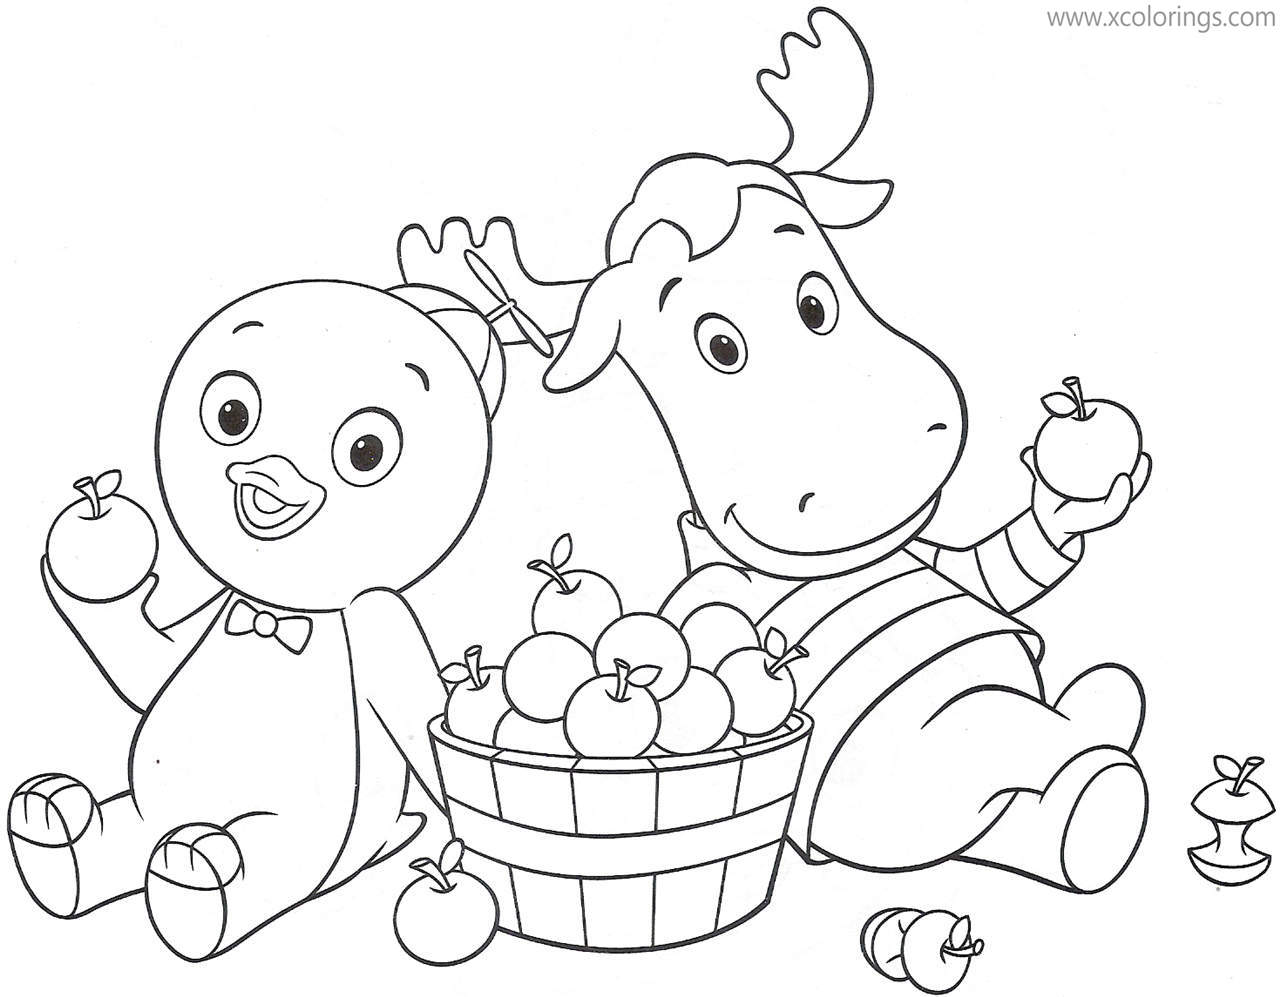 Free Backyardigans Coloring Pages Tyrone and Pablo printable